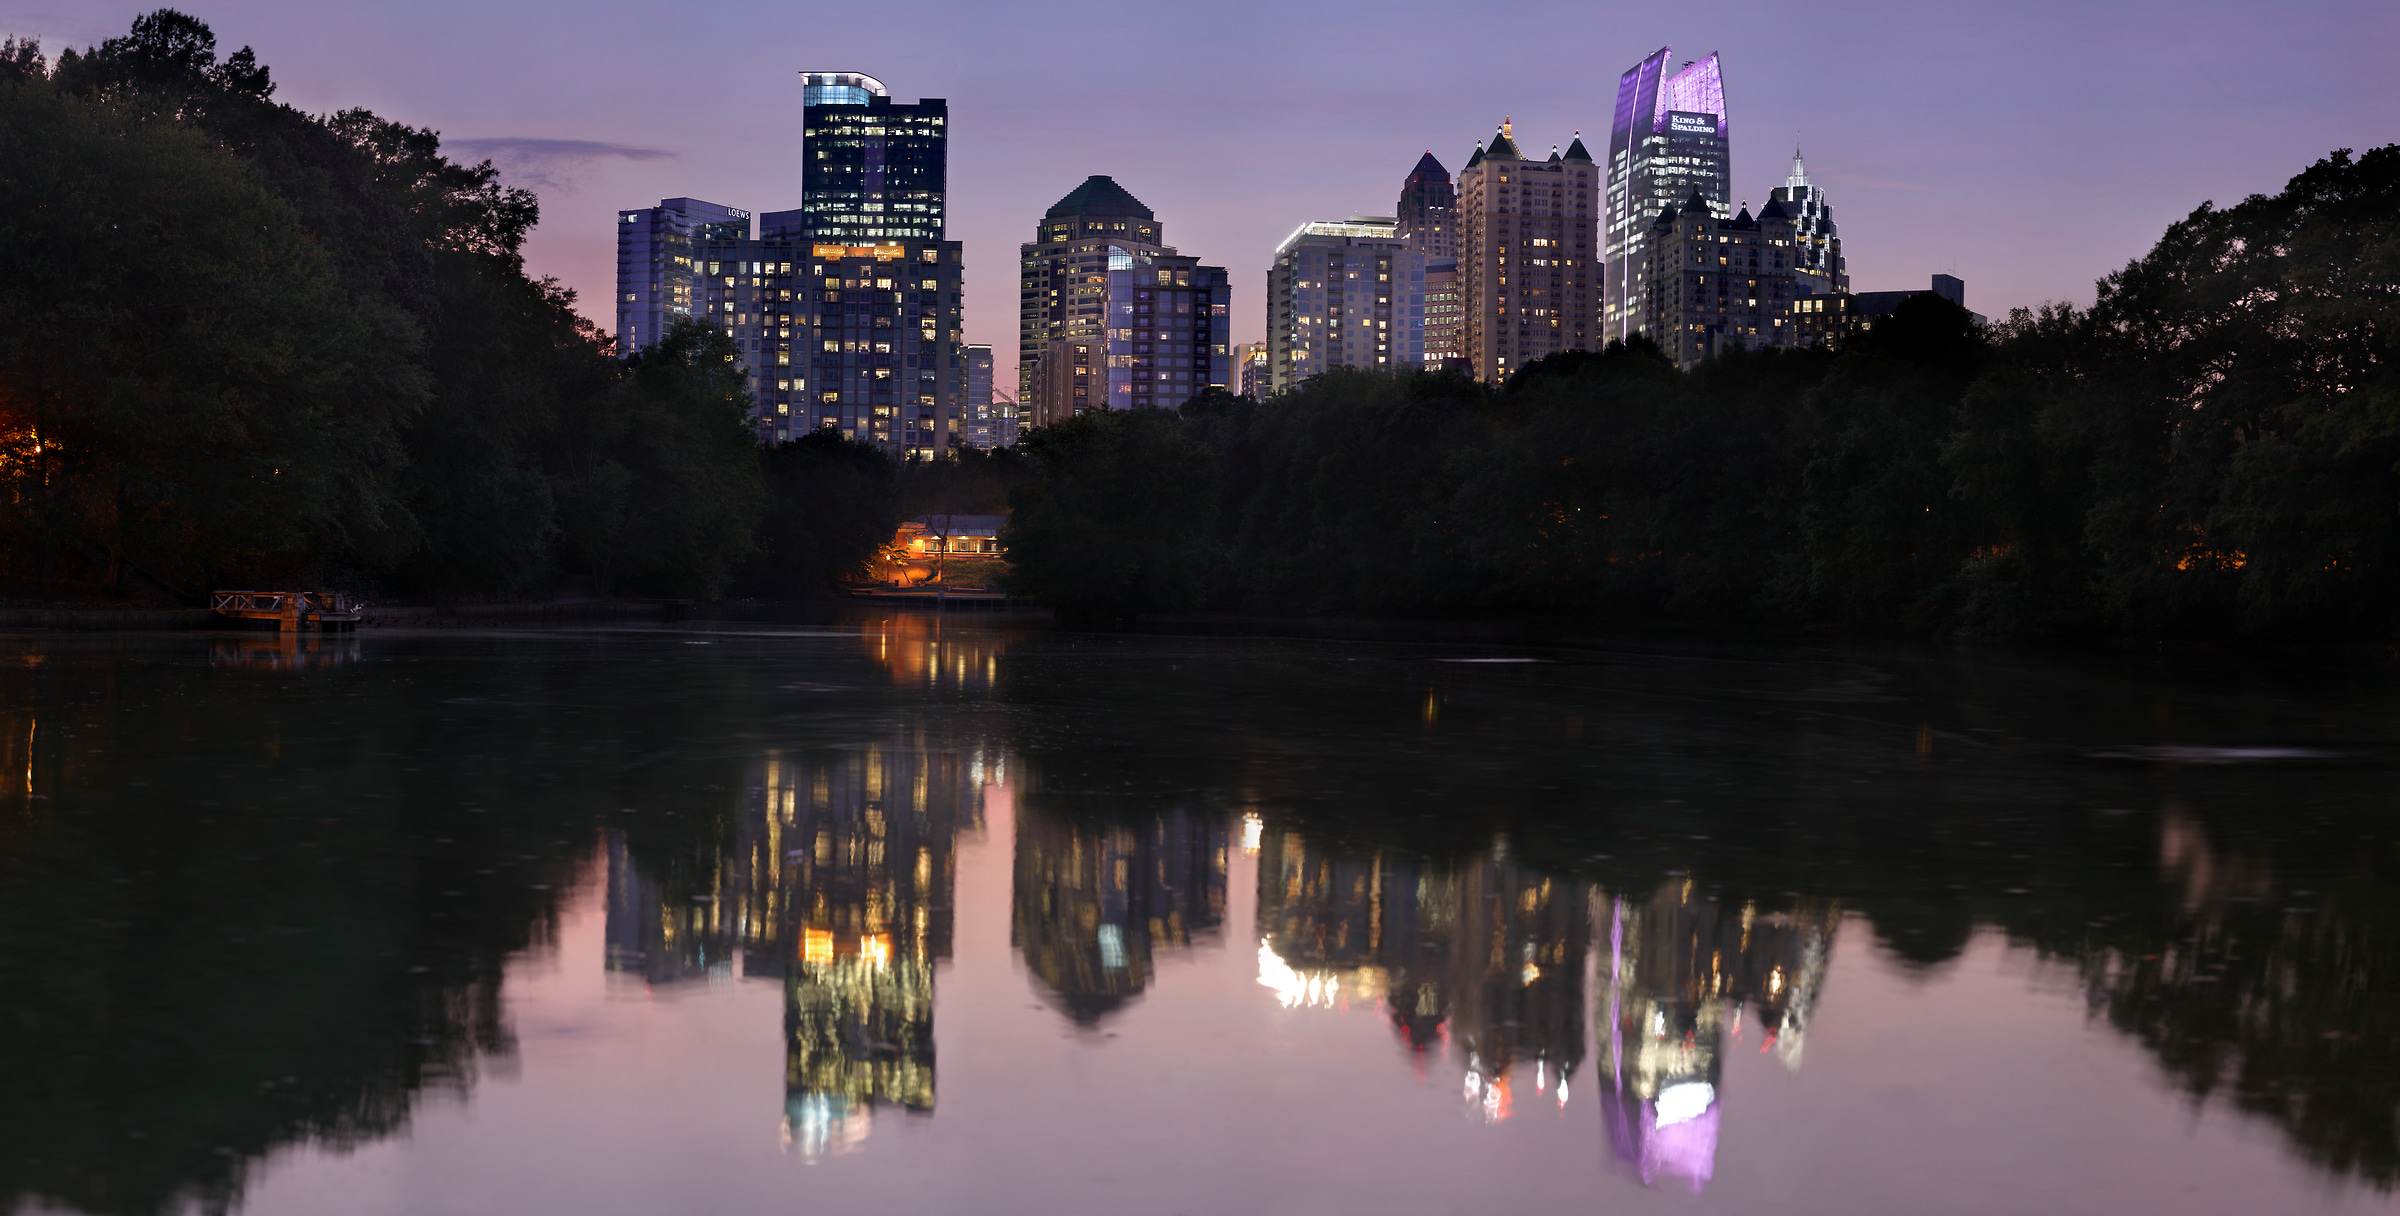 862 megapixels! A very high resolution, large-format VAST photo print of the Atlanta skyline and Piedmont Park at night; photograph created by Phil Crawshay in Piedmont Park, Atlanta, Georgia.